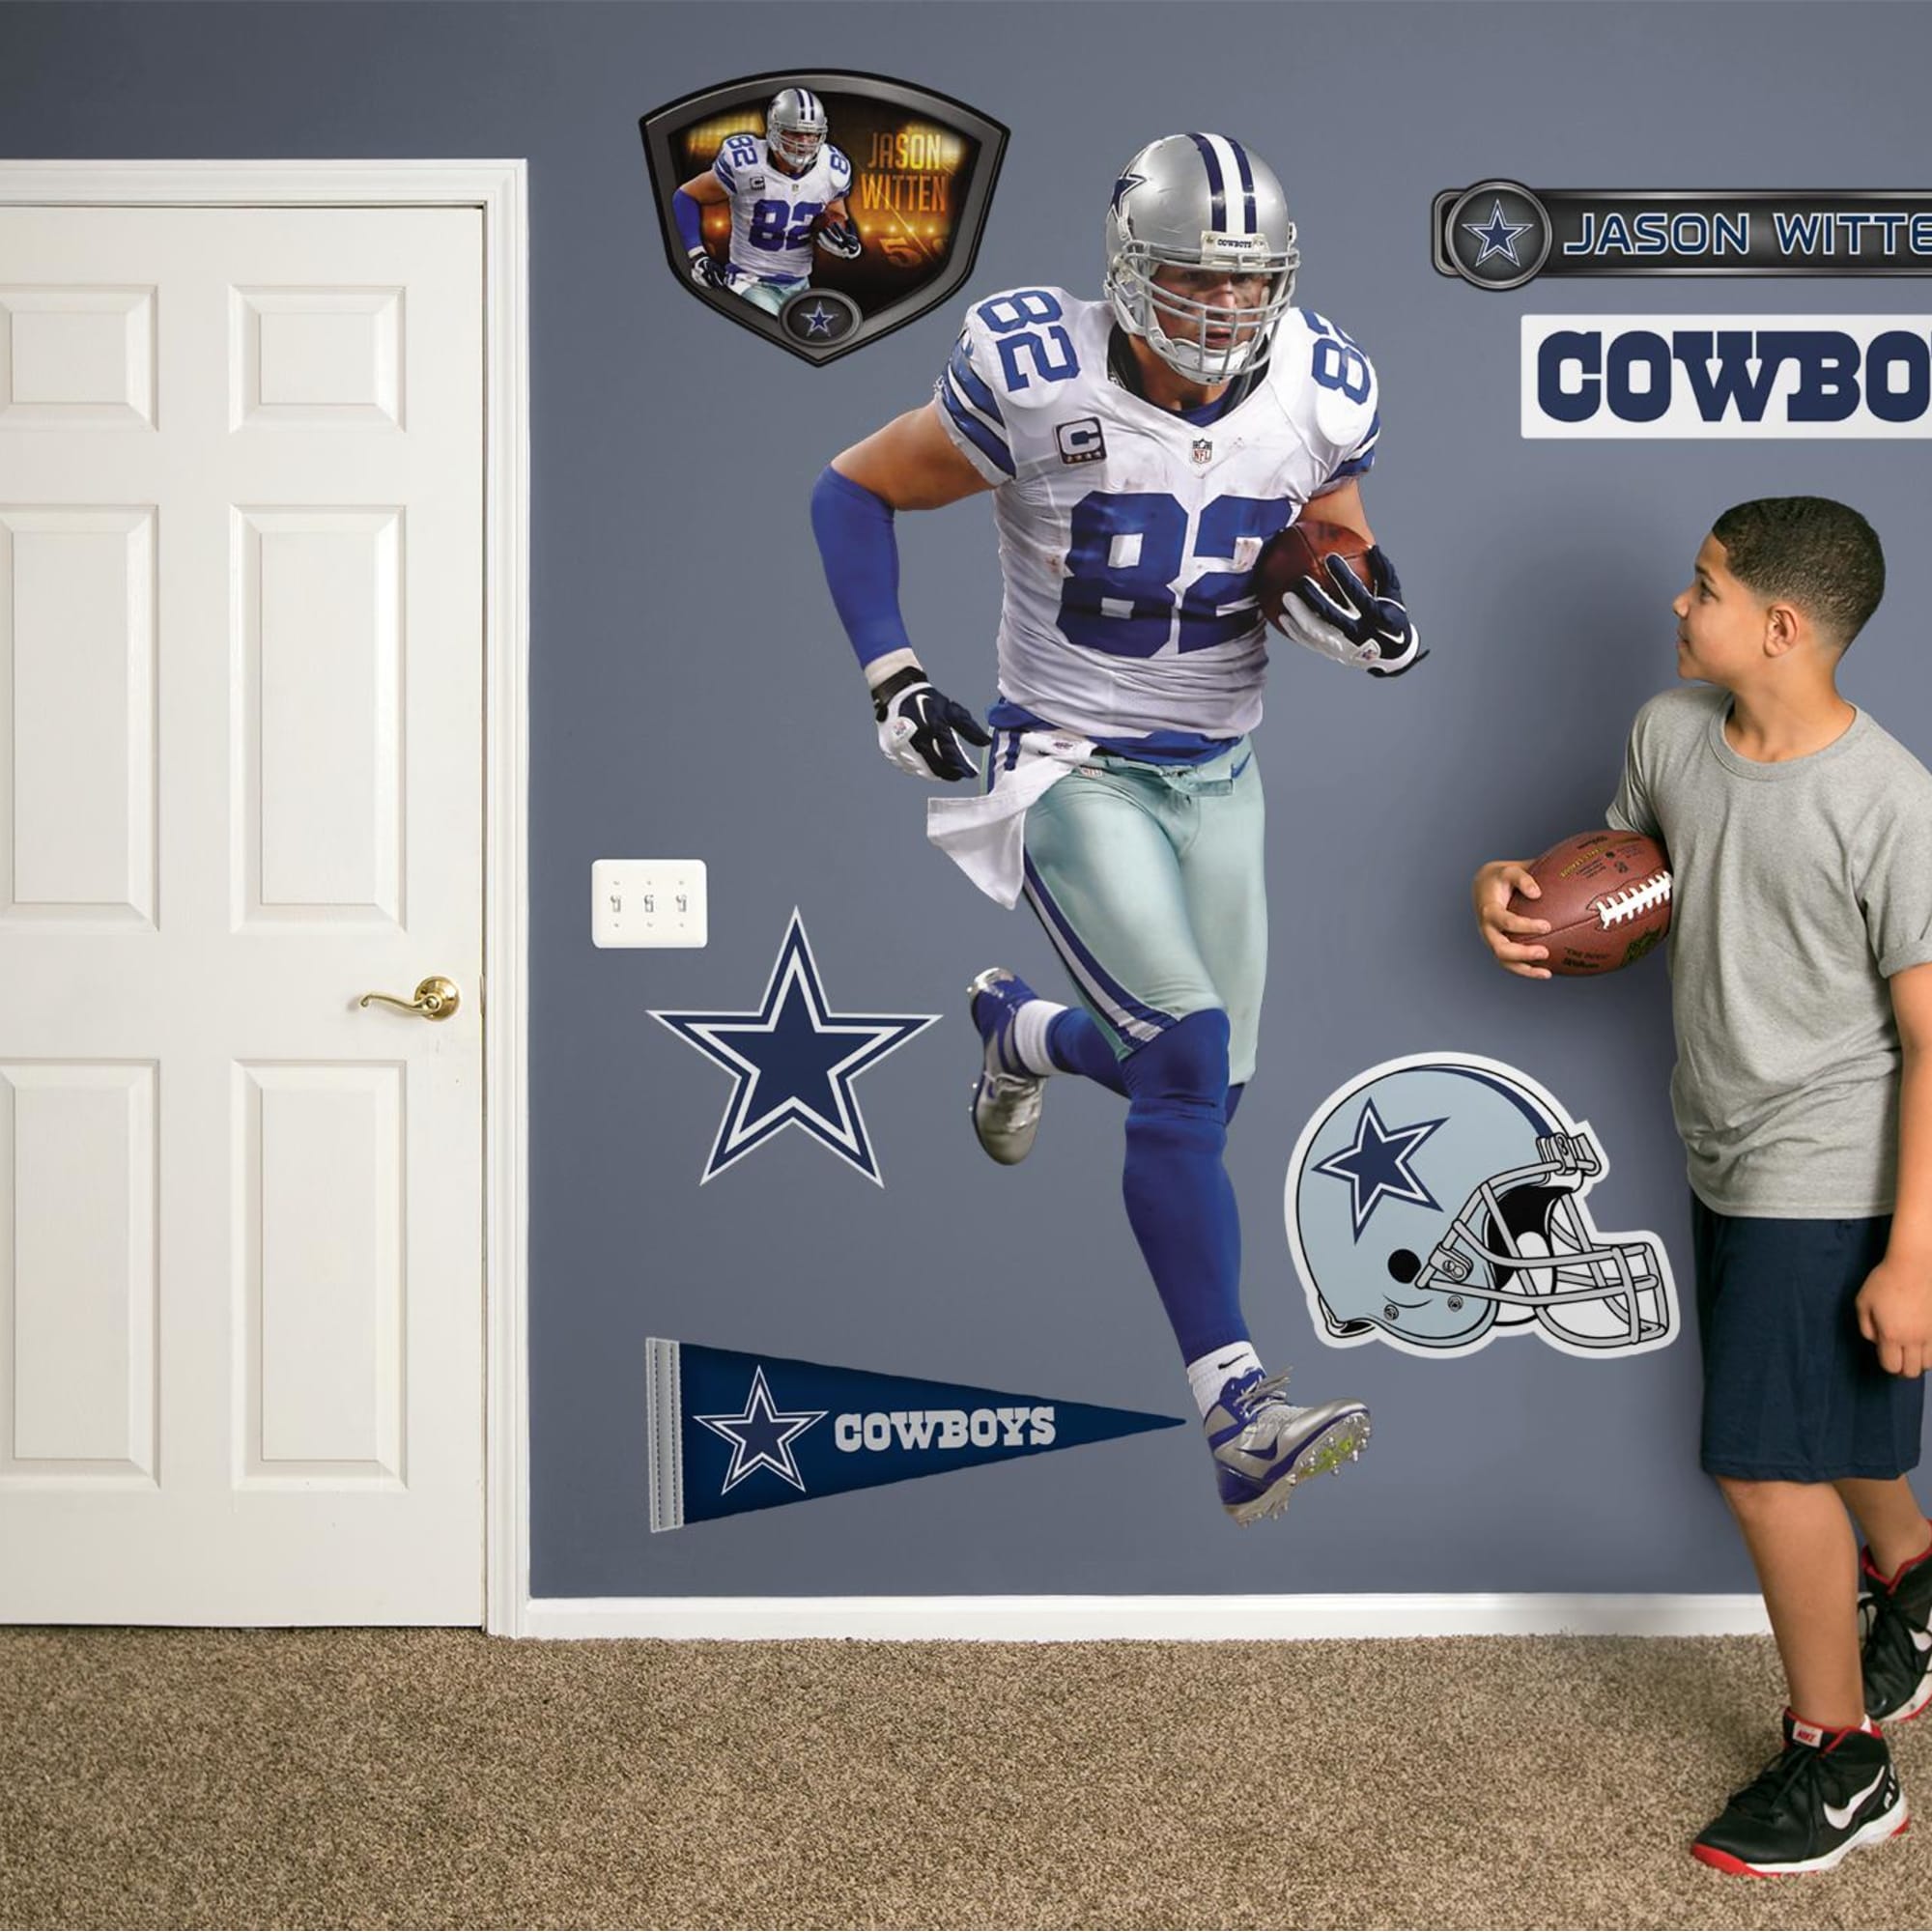 Jason Witten for Dallas Cowboys - Officially Licensed NFL Removable Wall Decal Life-Size Athlete + 9 Decals (34"W x 78"H) by Fat